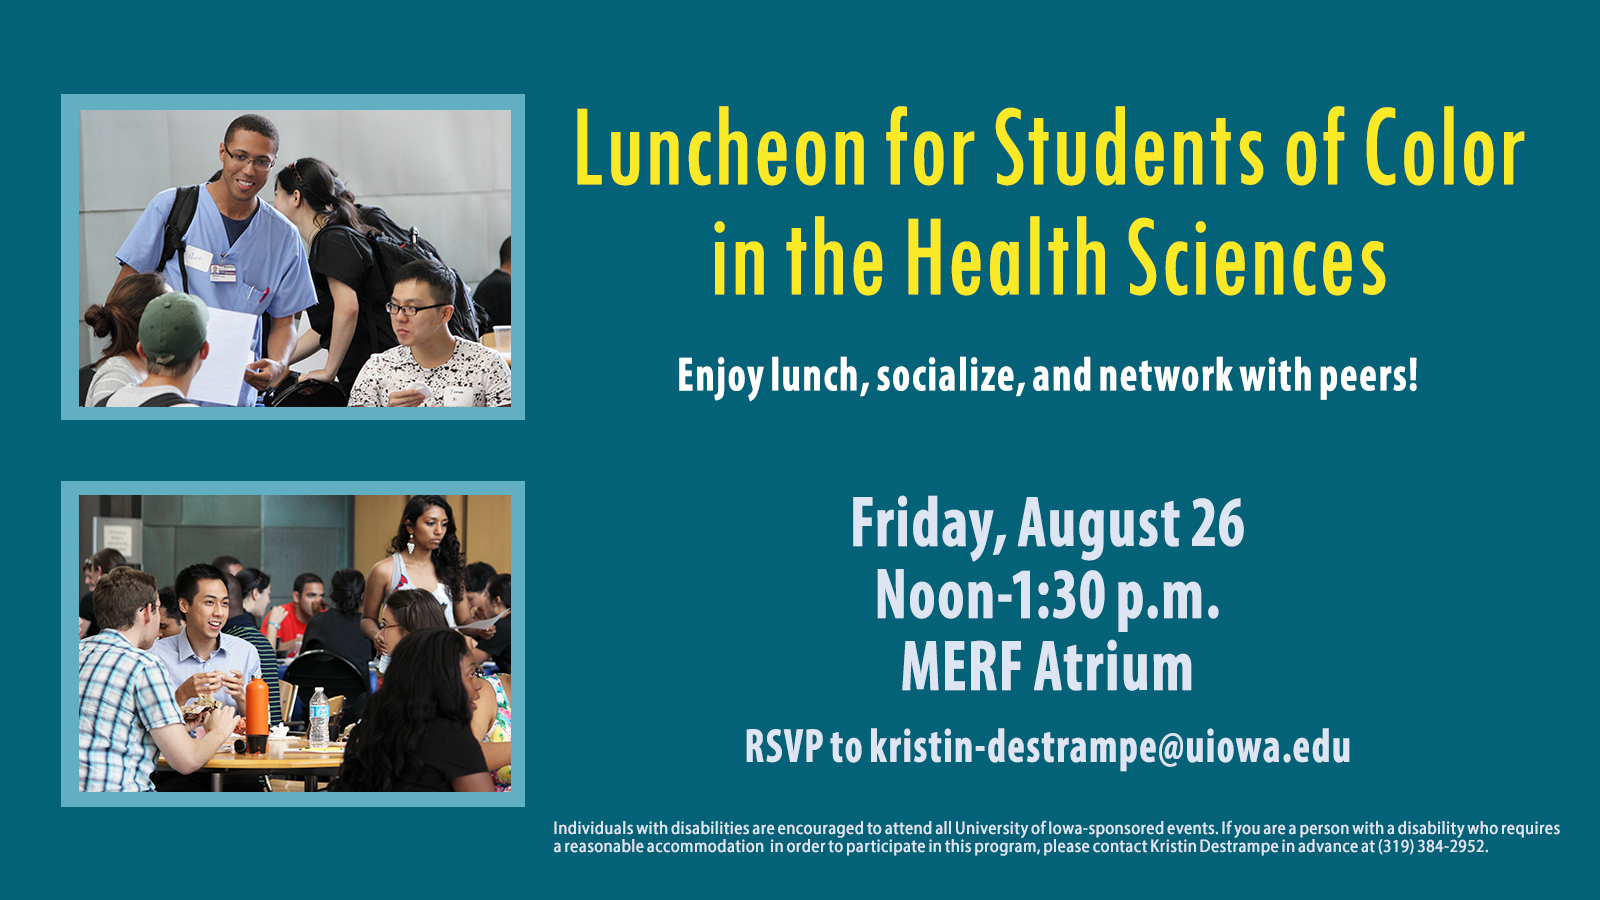 luncheon for students of color in the health sciences is August 26